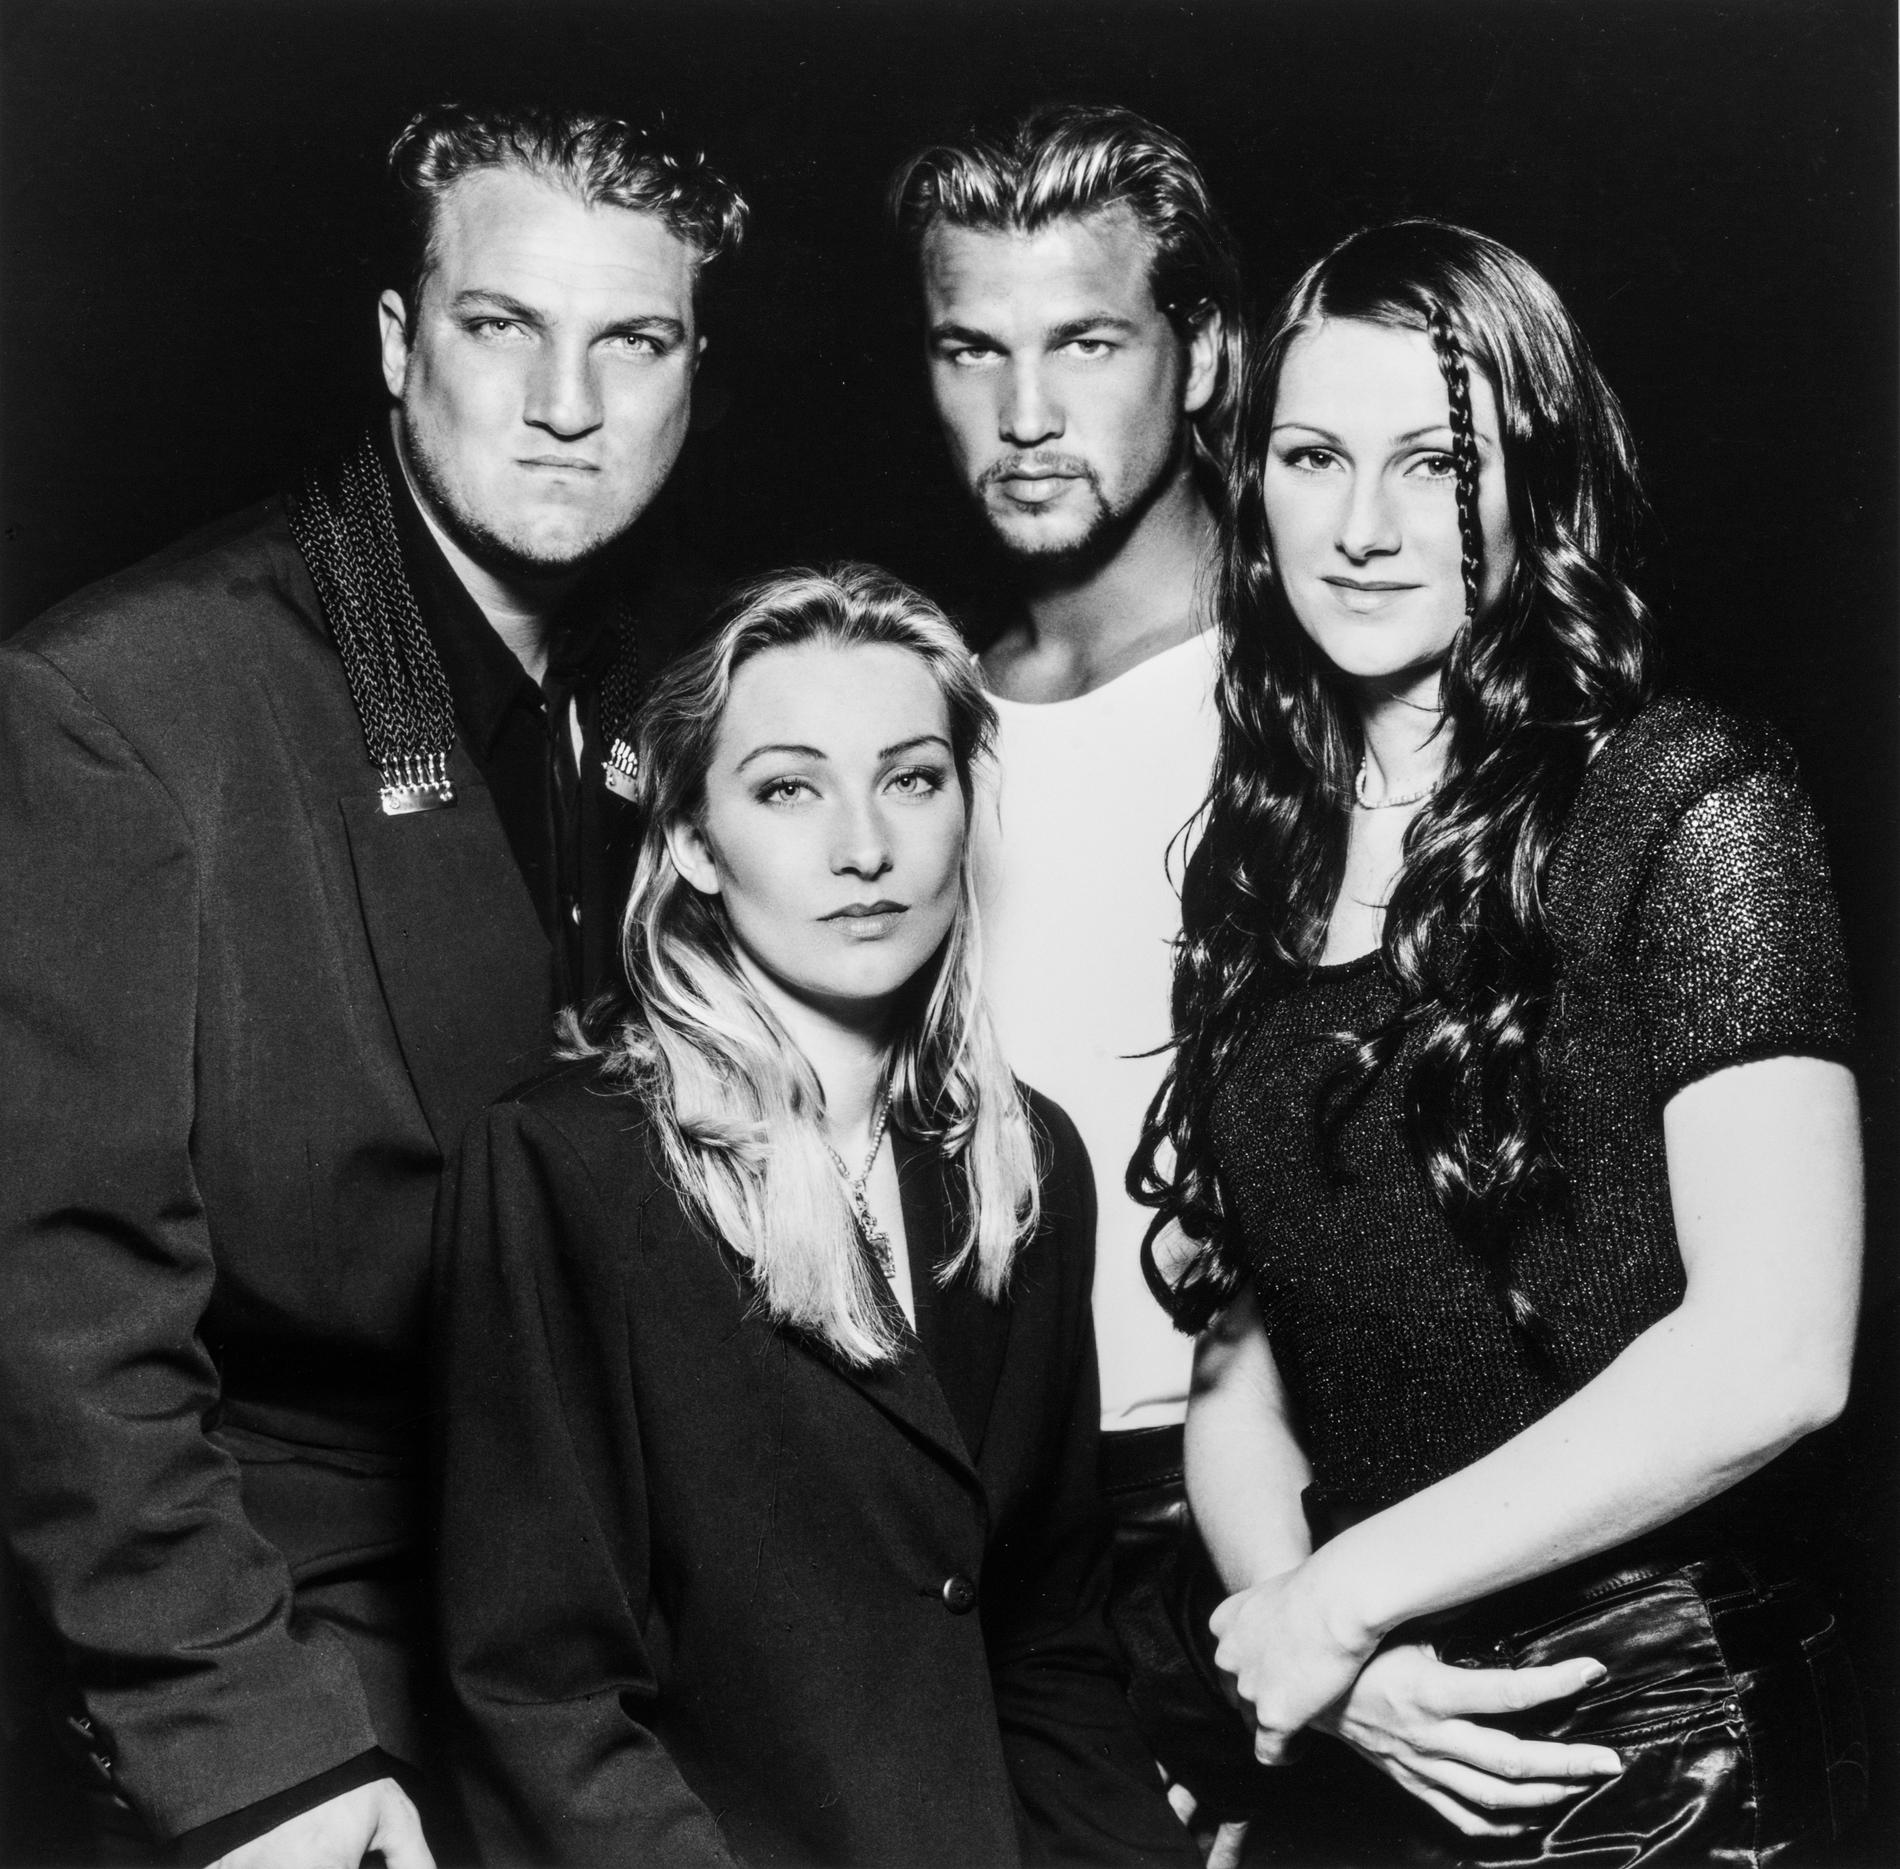 ”All that she wants: The unbelievable story of Ace of Base”.